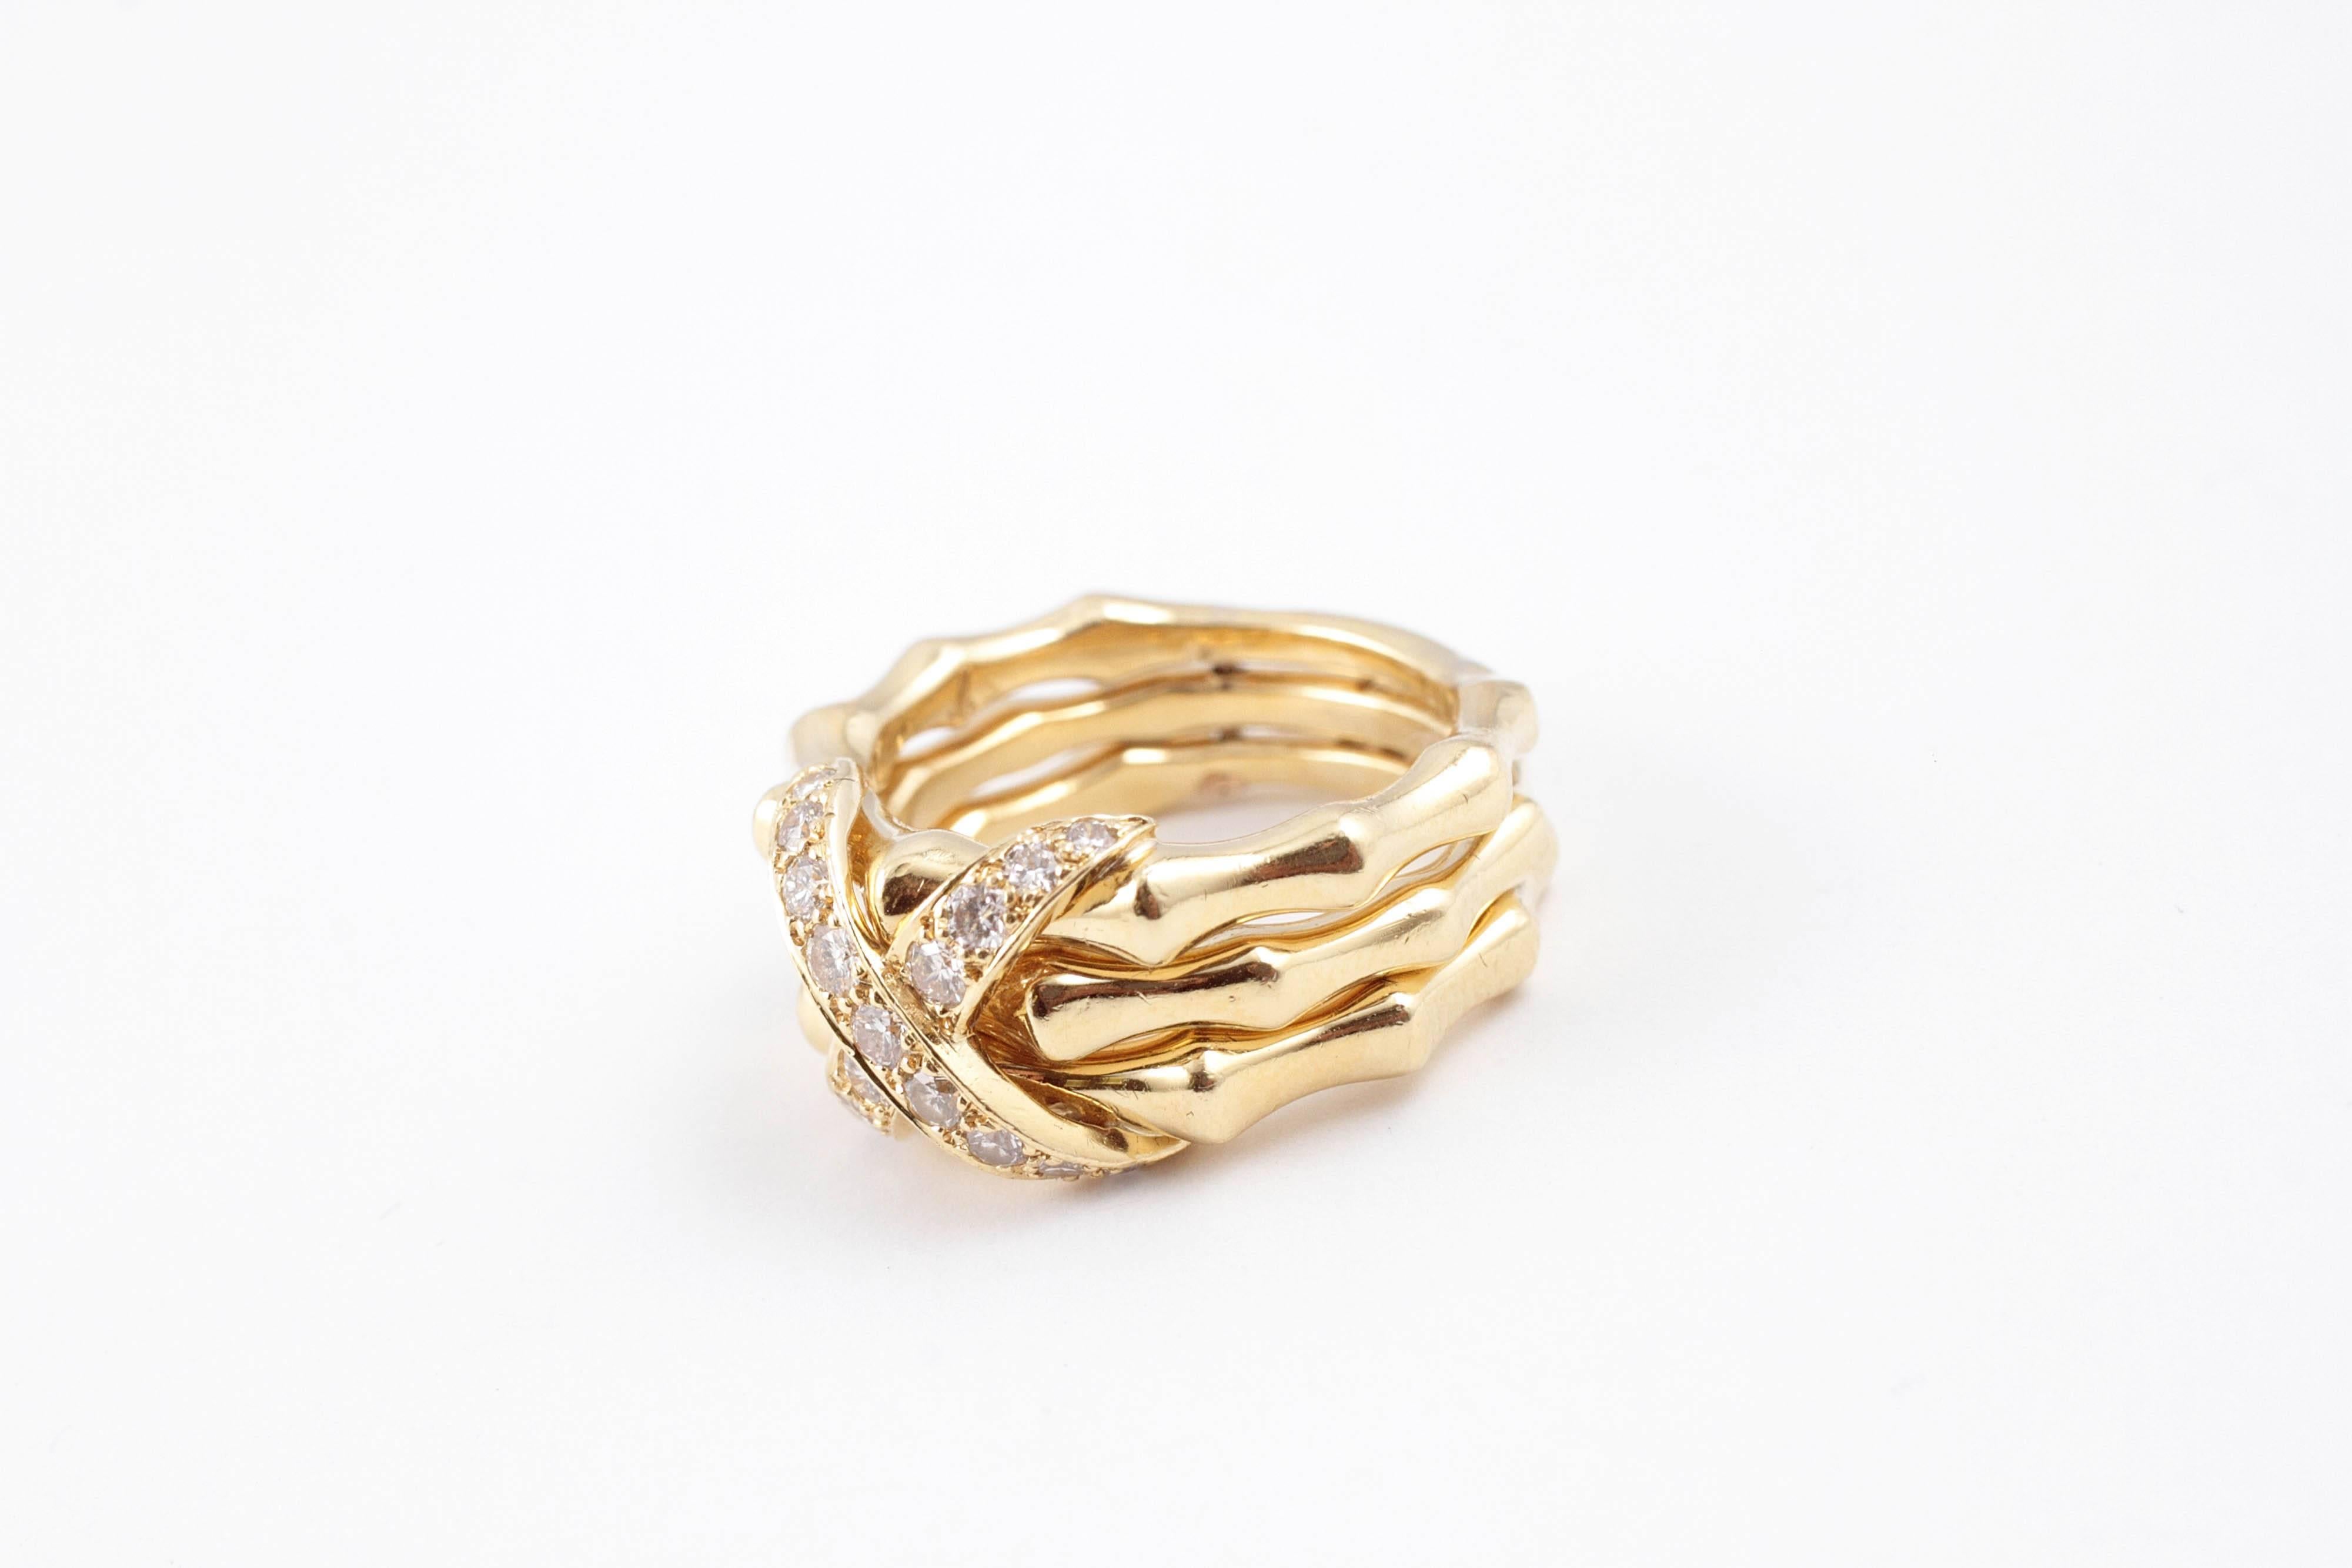 Highly polished 18 karat yellow gold bamboo ring with 1/2 carat of diamonds encrusted in a stylish X, in size 6 1/2.